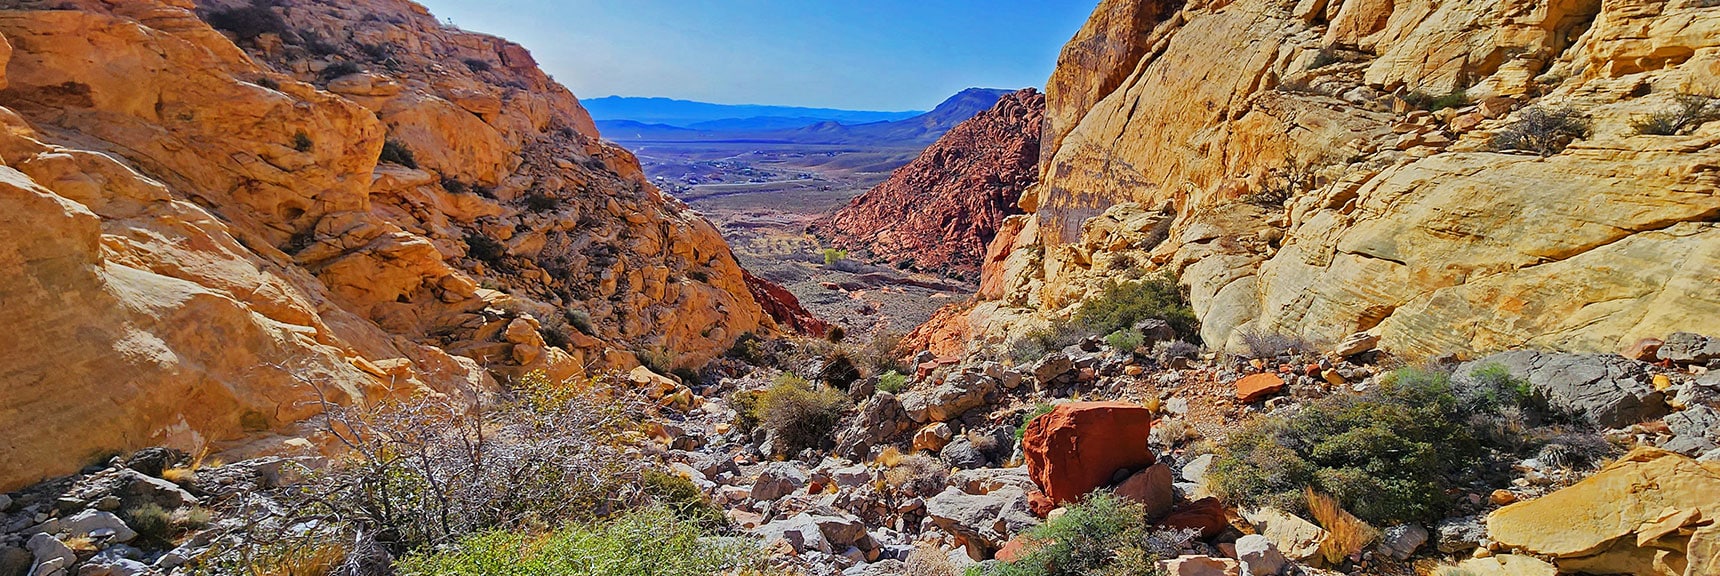 View Down Ash Canyon to Ash Spring, Calico Basin and Beyond | Ash Canyon to Calico Tanks | Calico Basin and Red Rock Canyon, Nevada | David Smith | Las Vegas Area Trails